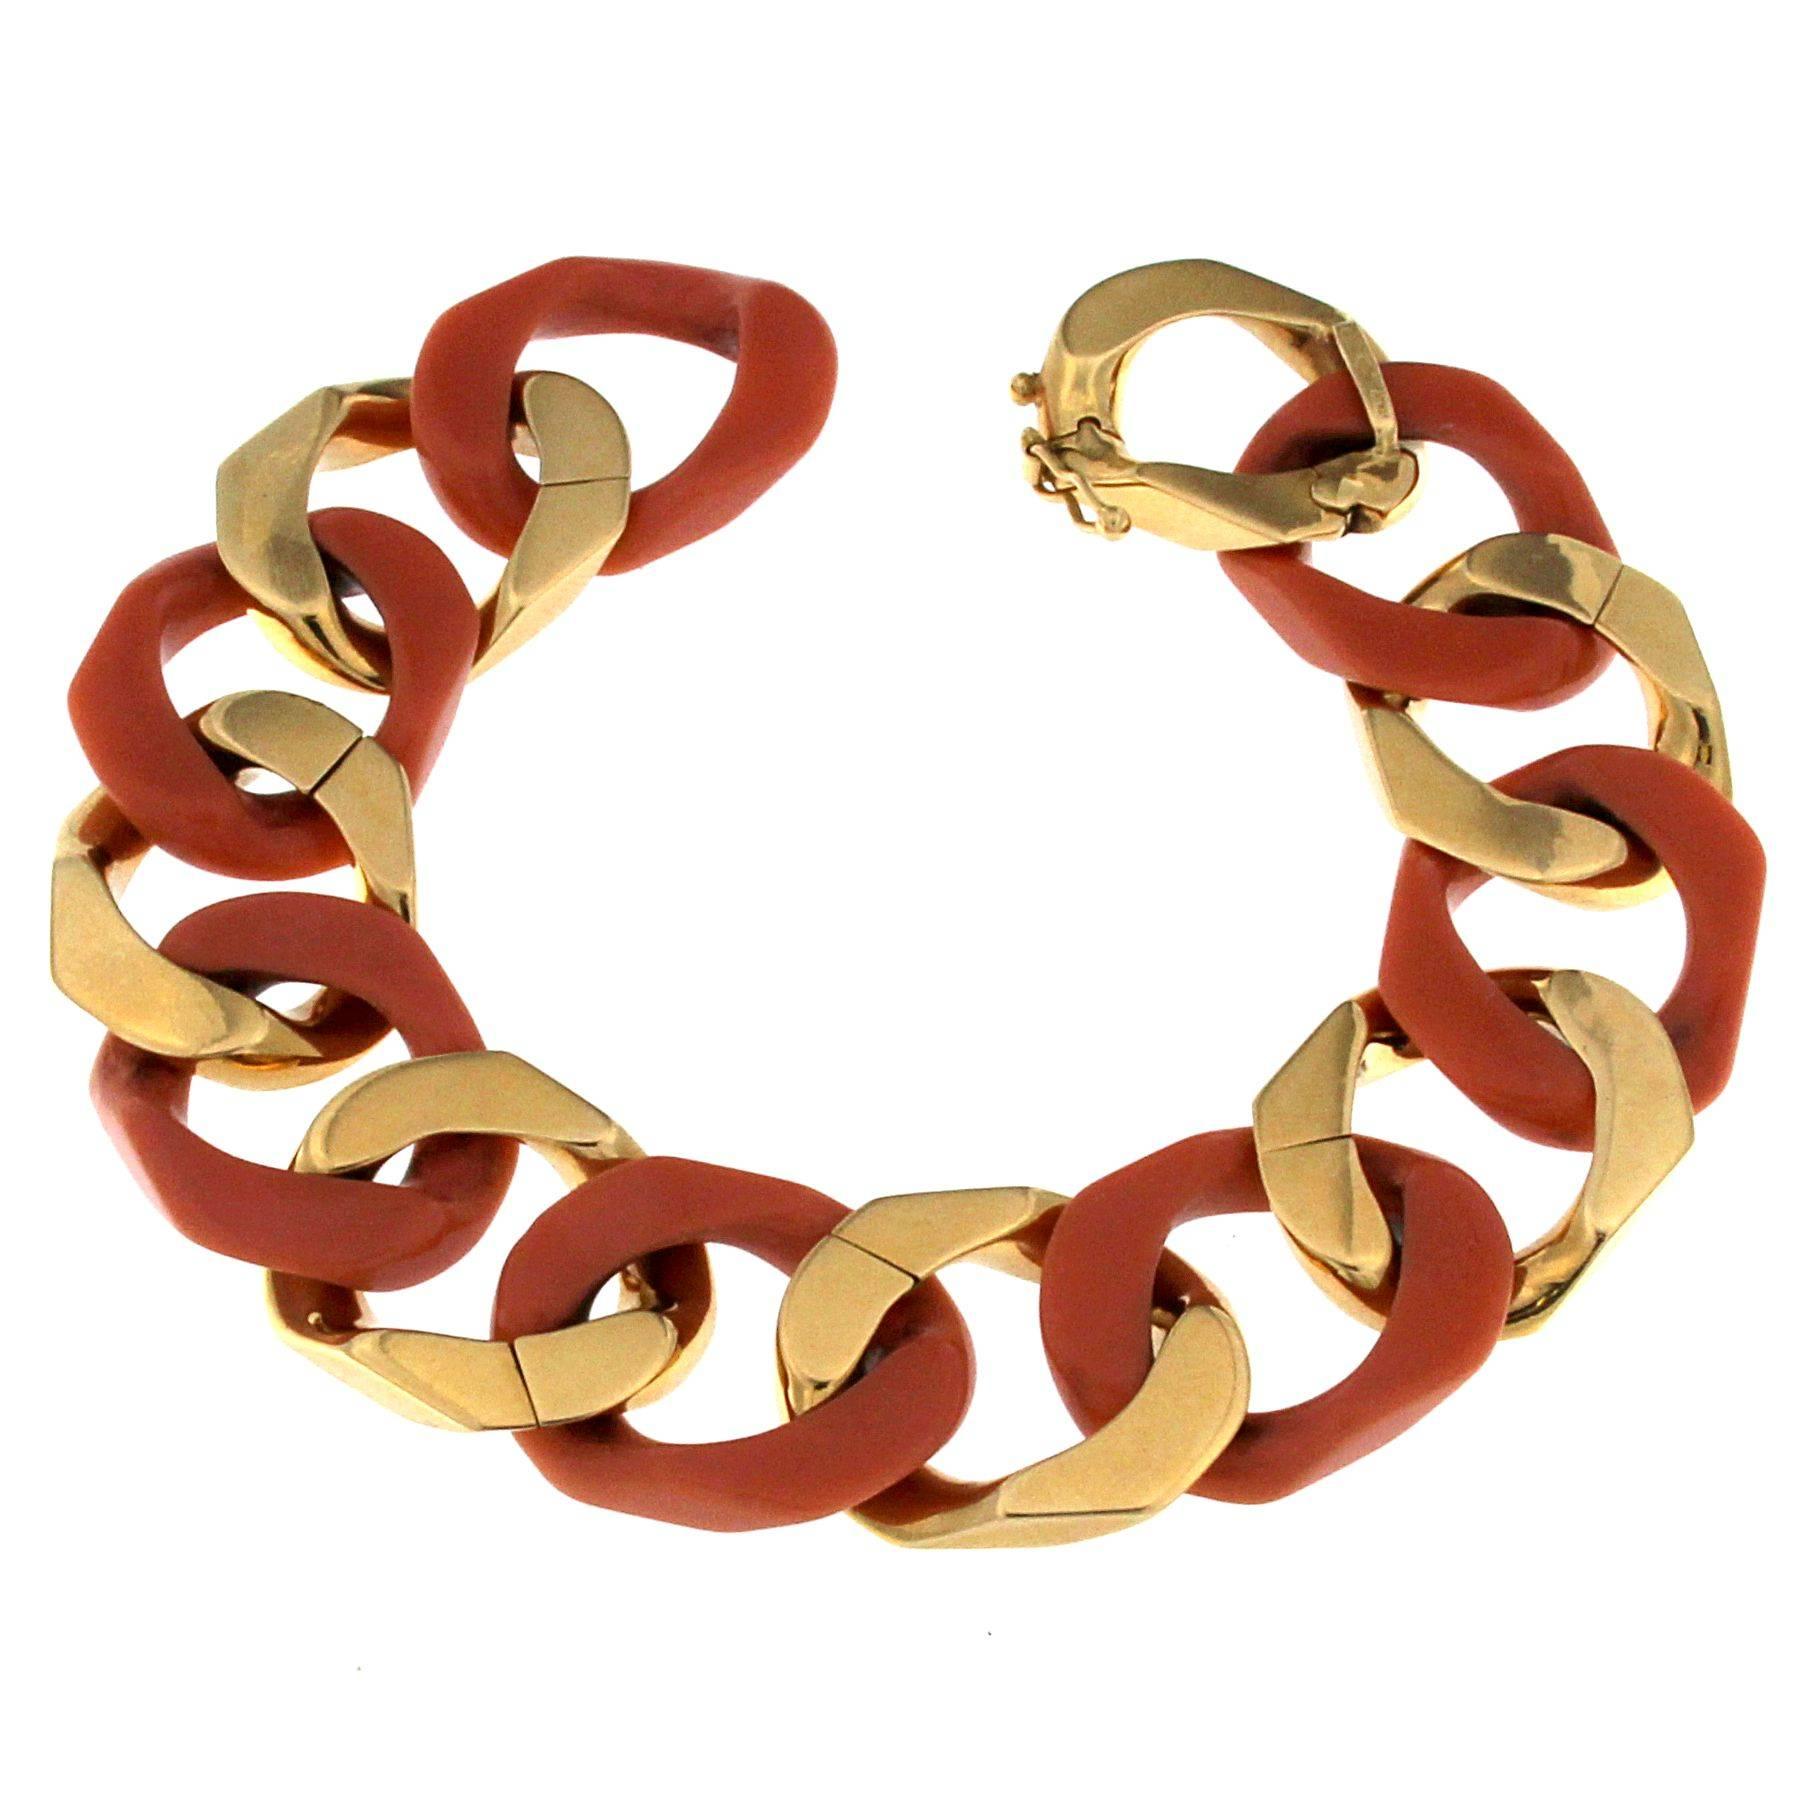 Very appealing set made by a bracelet and a necklace.  You can join the 2 pieces to wear them as a unique long chain. This is made in the style of the 1970s
The necklace is made of 17 gold links and 17 in coral while in the bracelet there are 7 gold